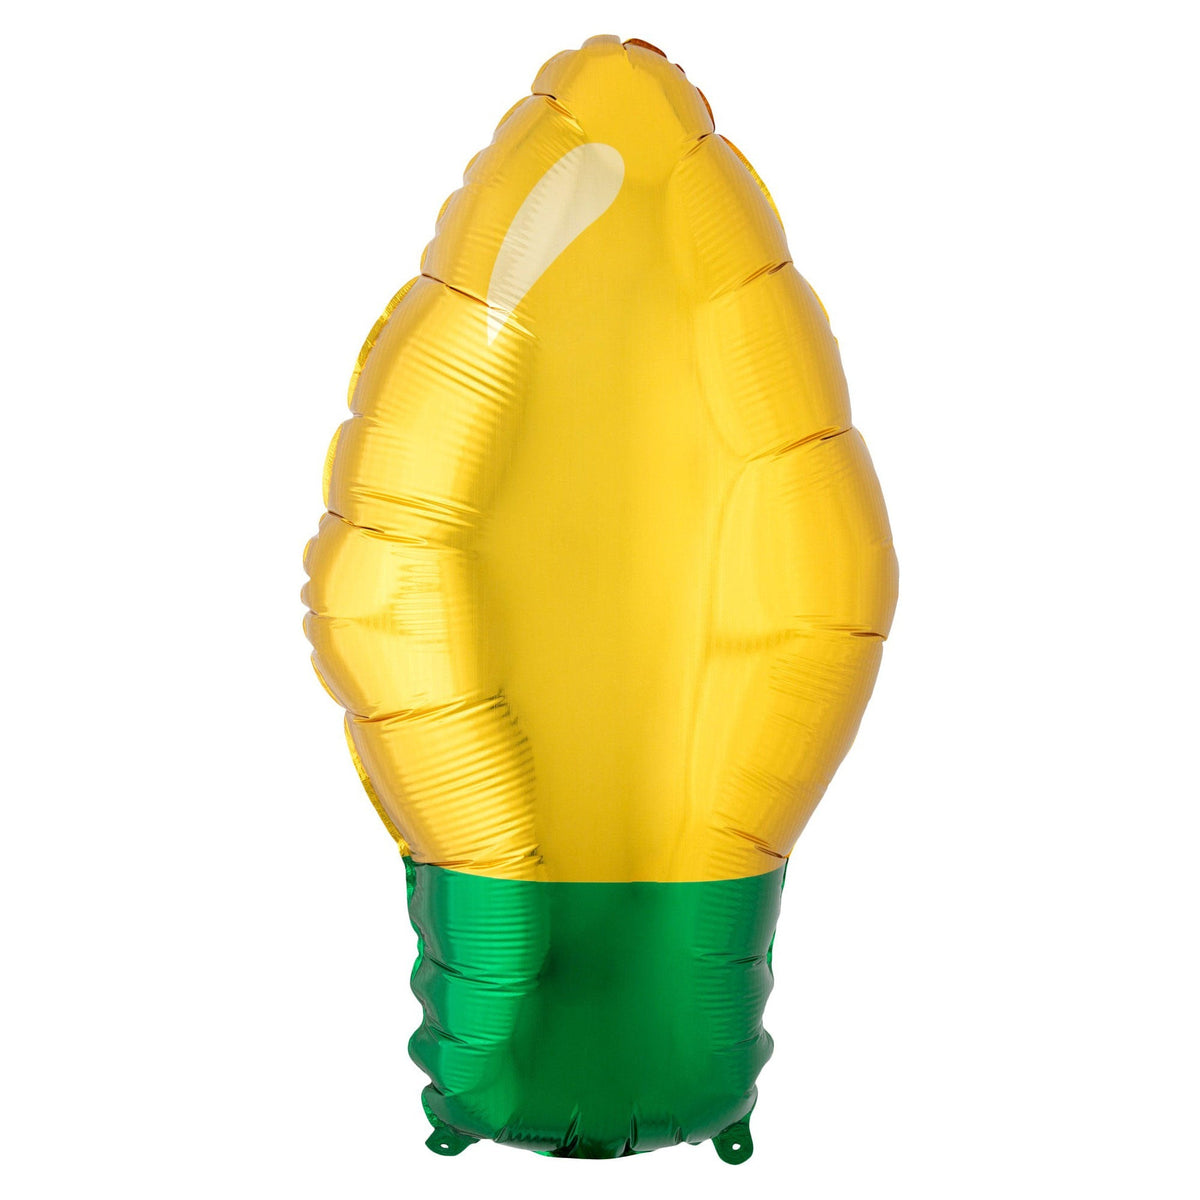 LE GROUPE BLC INTL INC Balloons Yellow Christmas Light Supershape Balloon, 22 Inches 026635420457